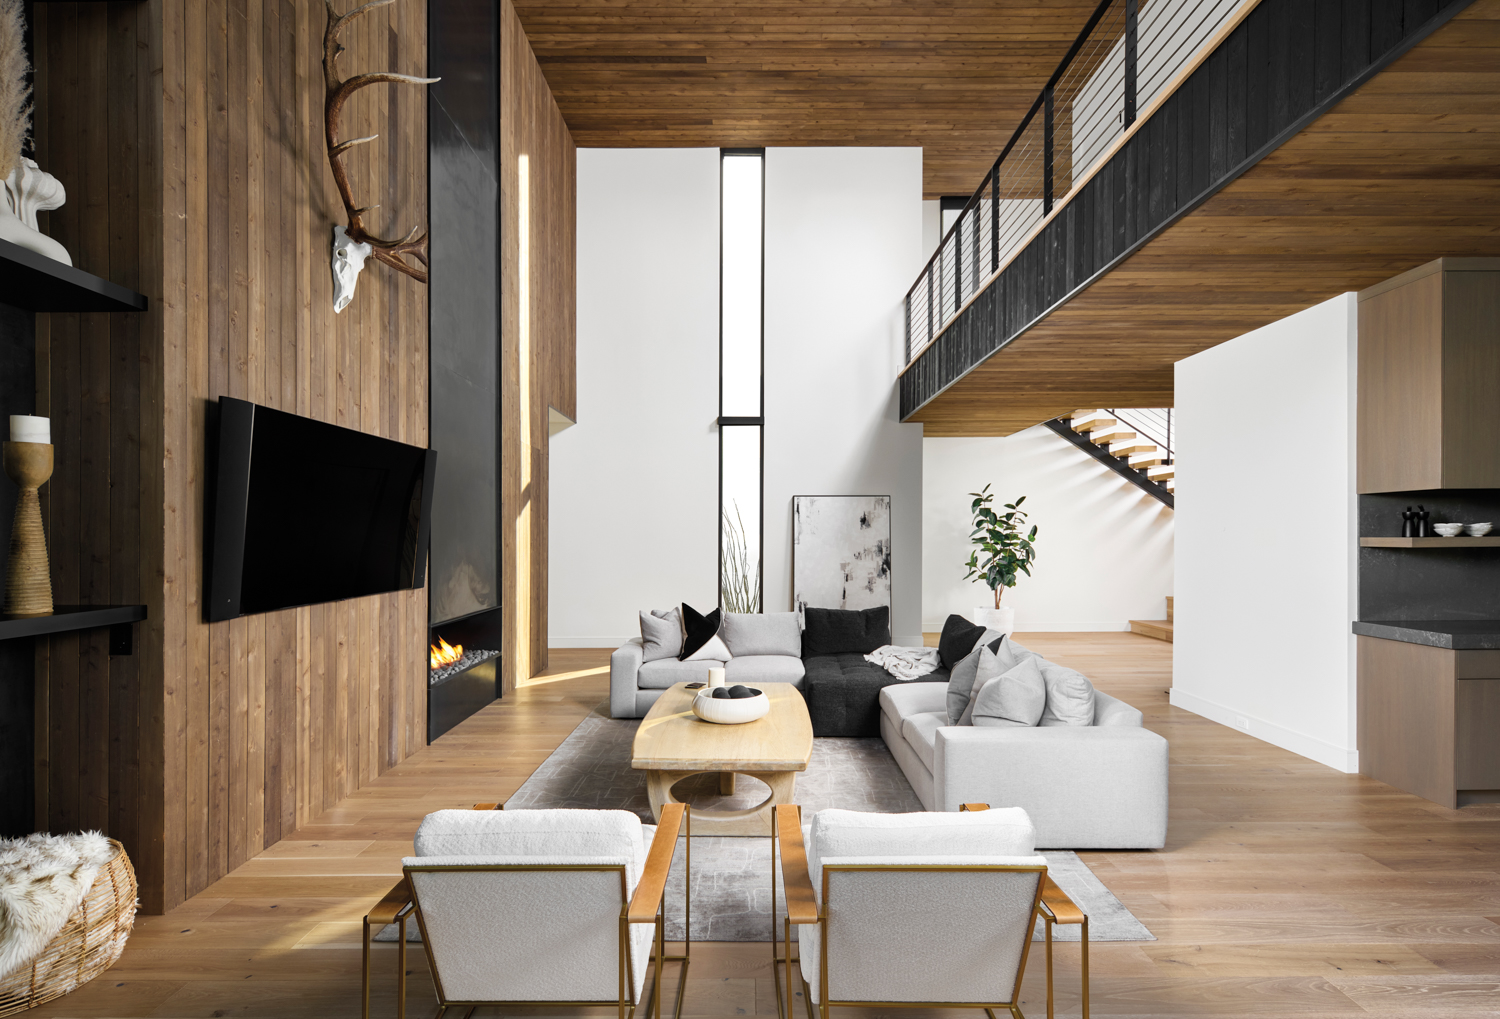 A double-story living room with wood panel walls and gray seating.